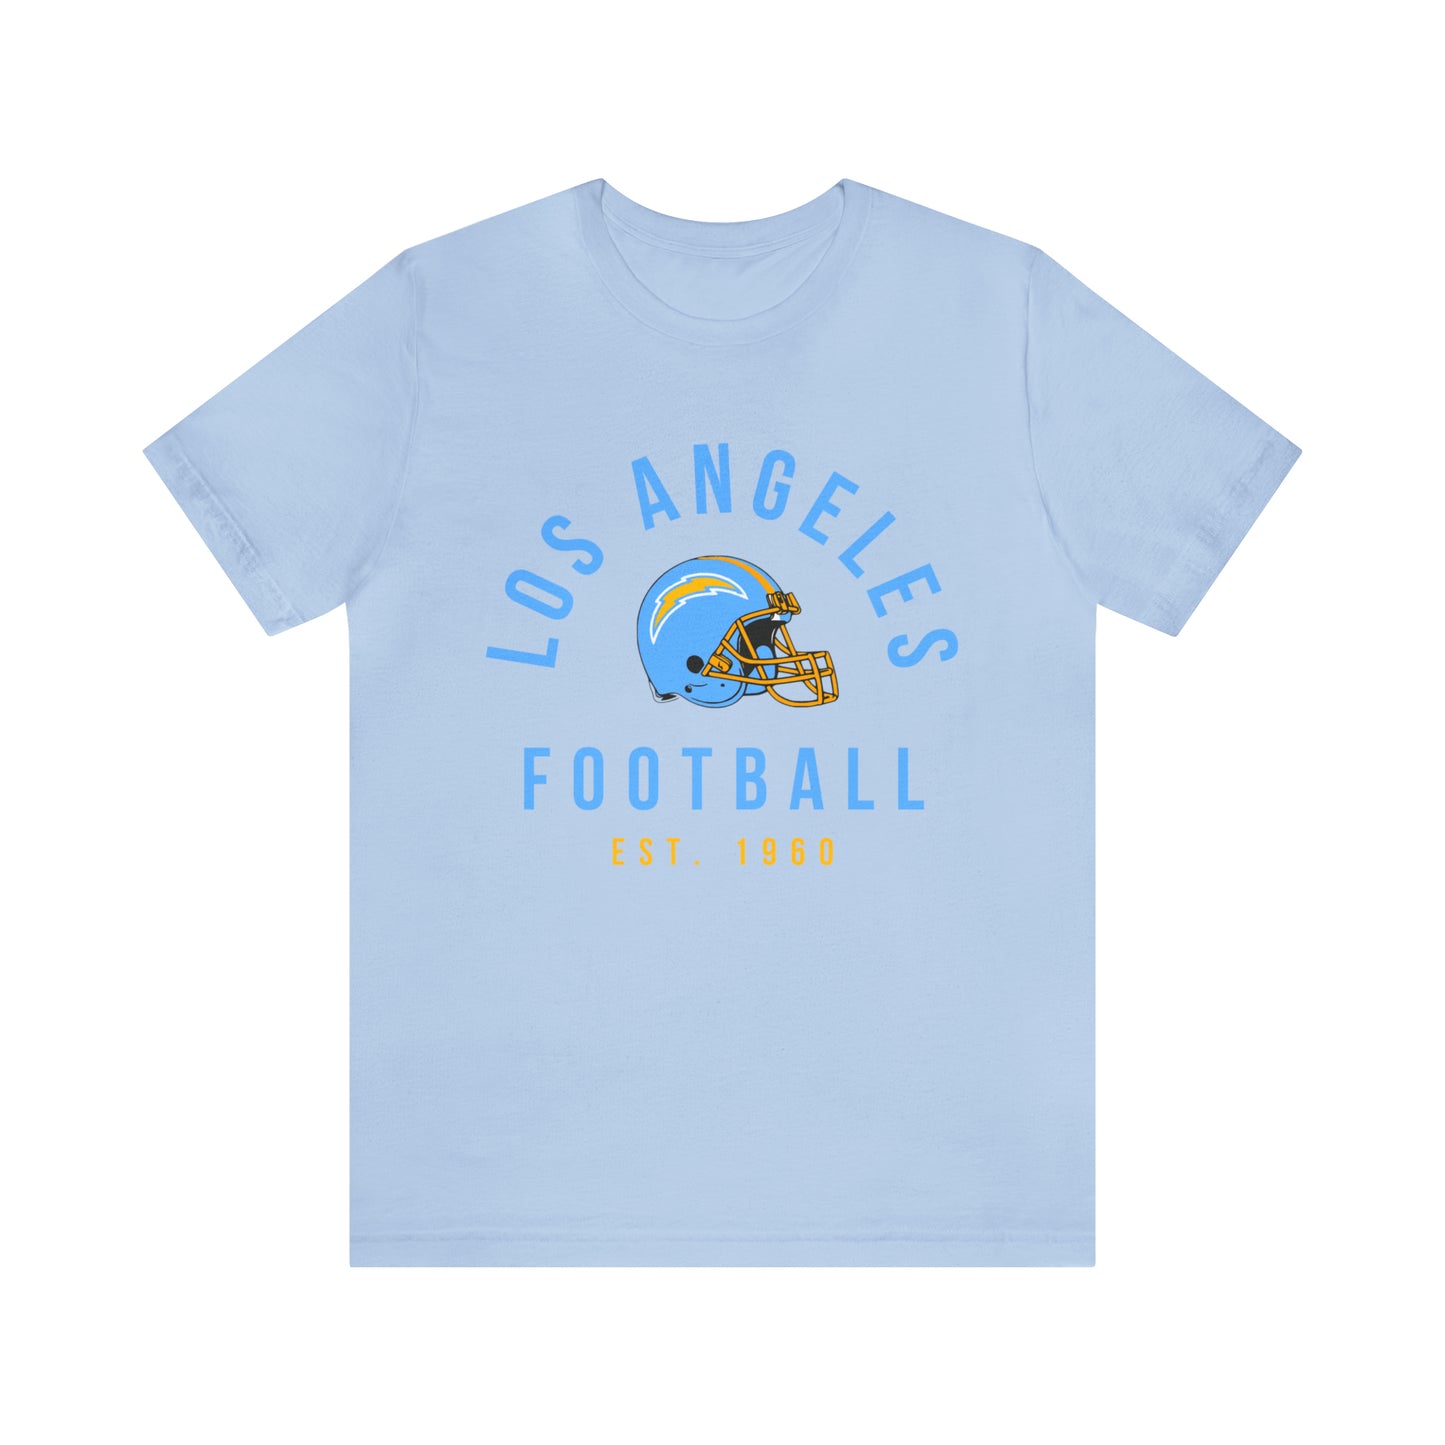 Vintage Los Angeles Chargers T-Shirt - Vintage L.A. Football Oversized Short Sleeve Tee Style Apparel - Design 2